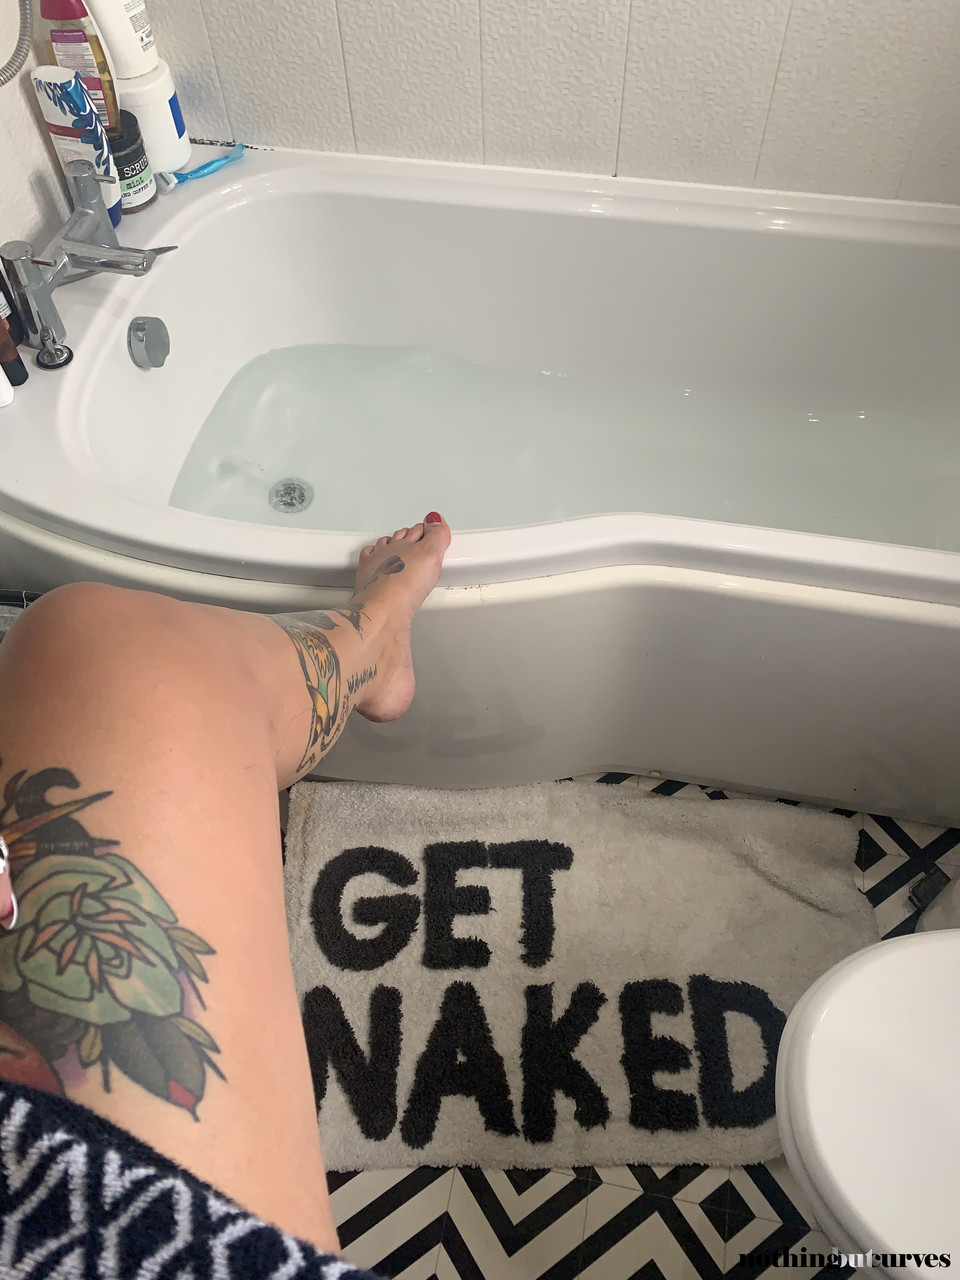 Inked fatty Cherrie Pie flaunts her big breasts while having a bath foto porno #424173947 | Nothing But Curves Pics, Cherrie Pie, Tattoo, porno mobile